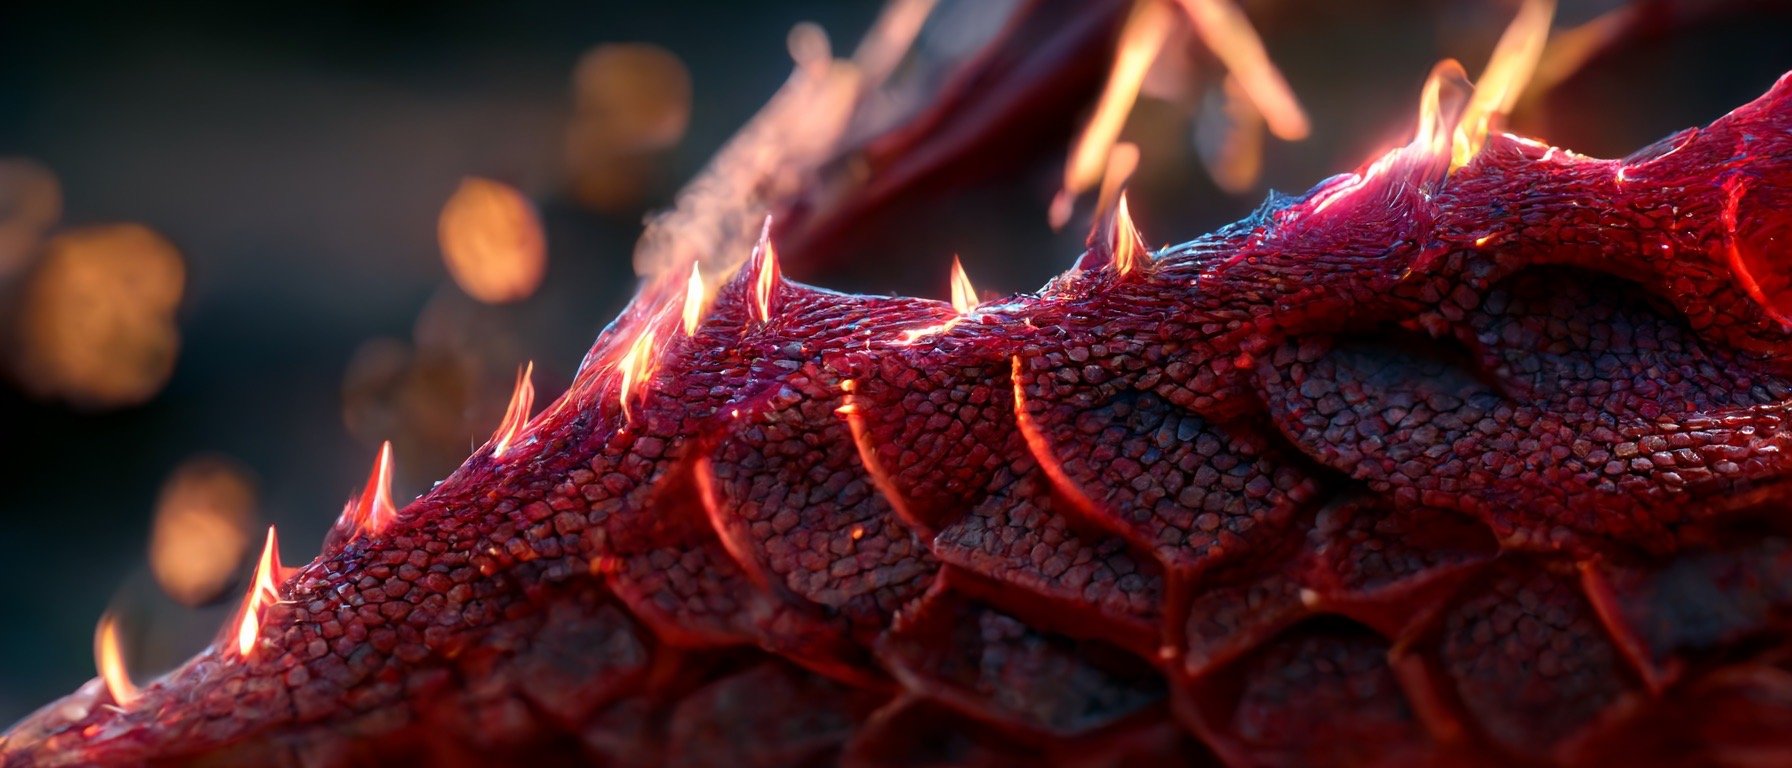 e1e0858a-4fdd-4ebd-9617-388599f8d9fe_S3RAPH_close_up_of_dragon_scales._ruby_details_and_breathing_fire_and_lightning_connective_tissue_majestic..JPG